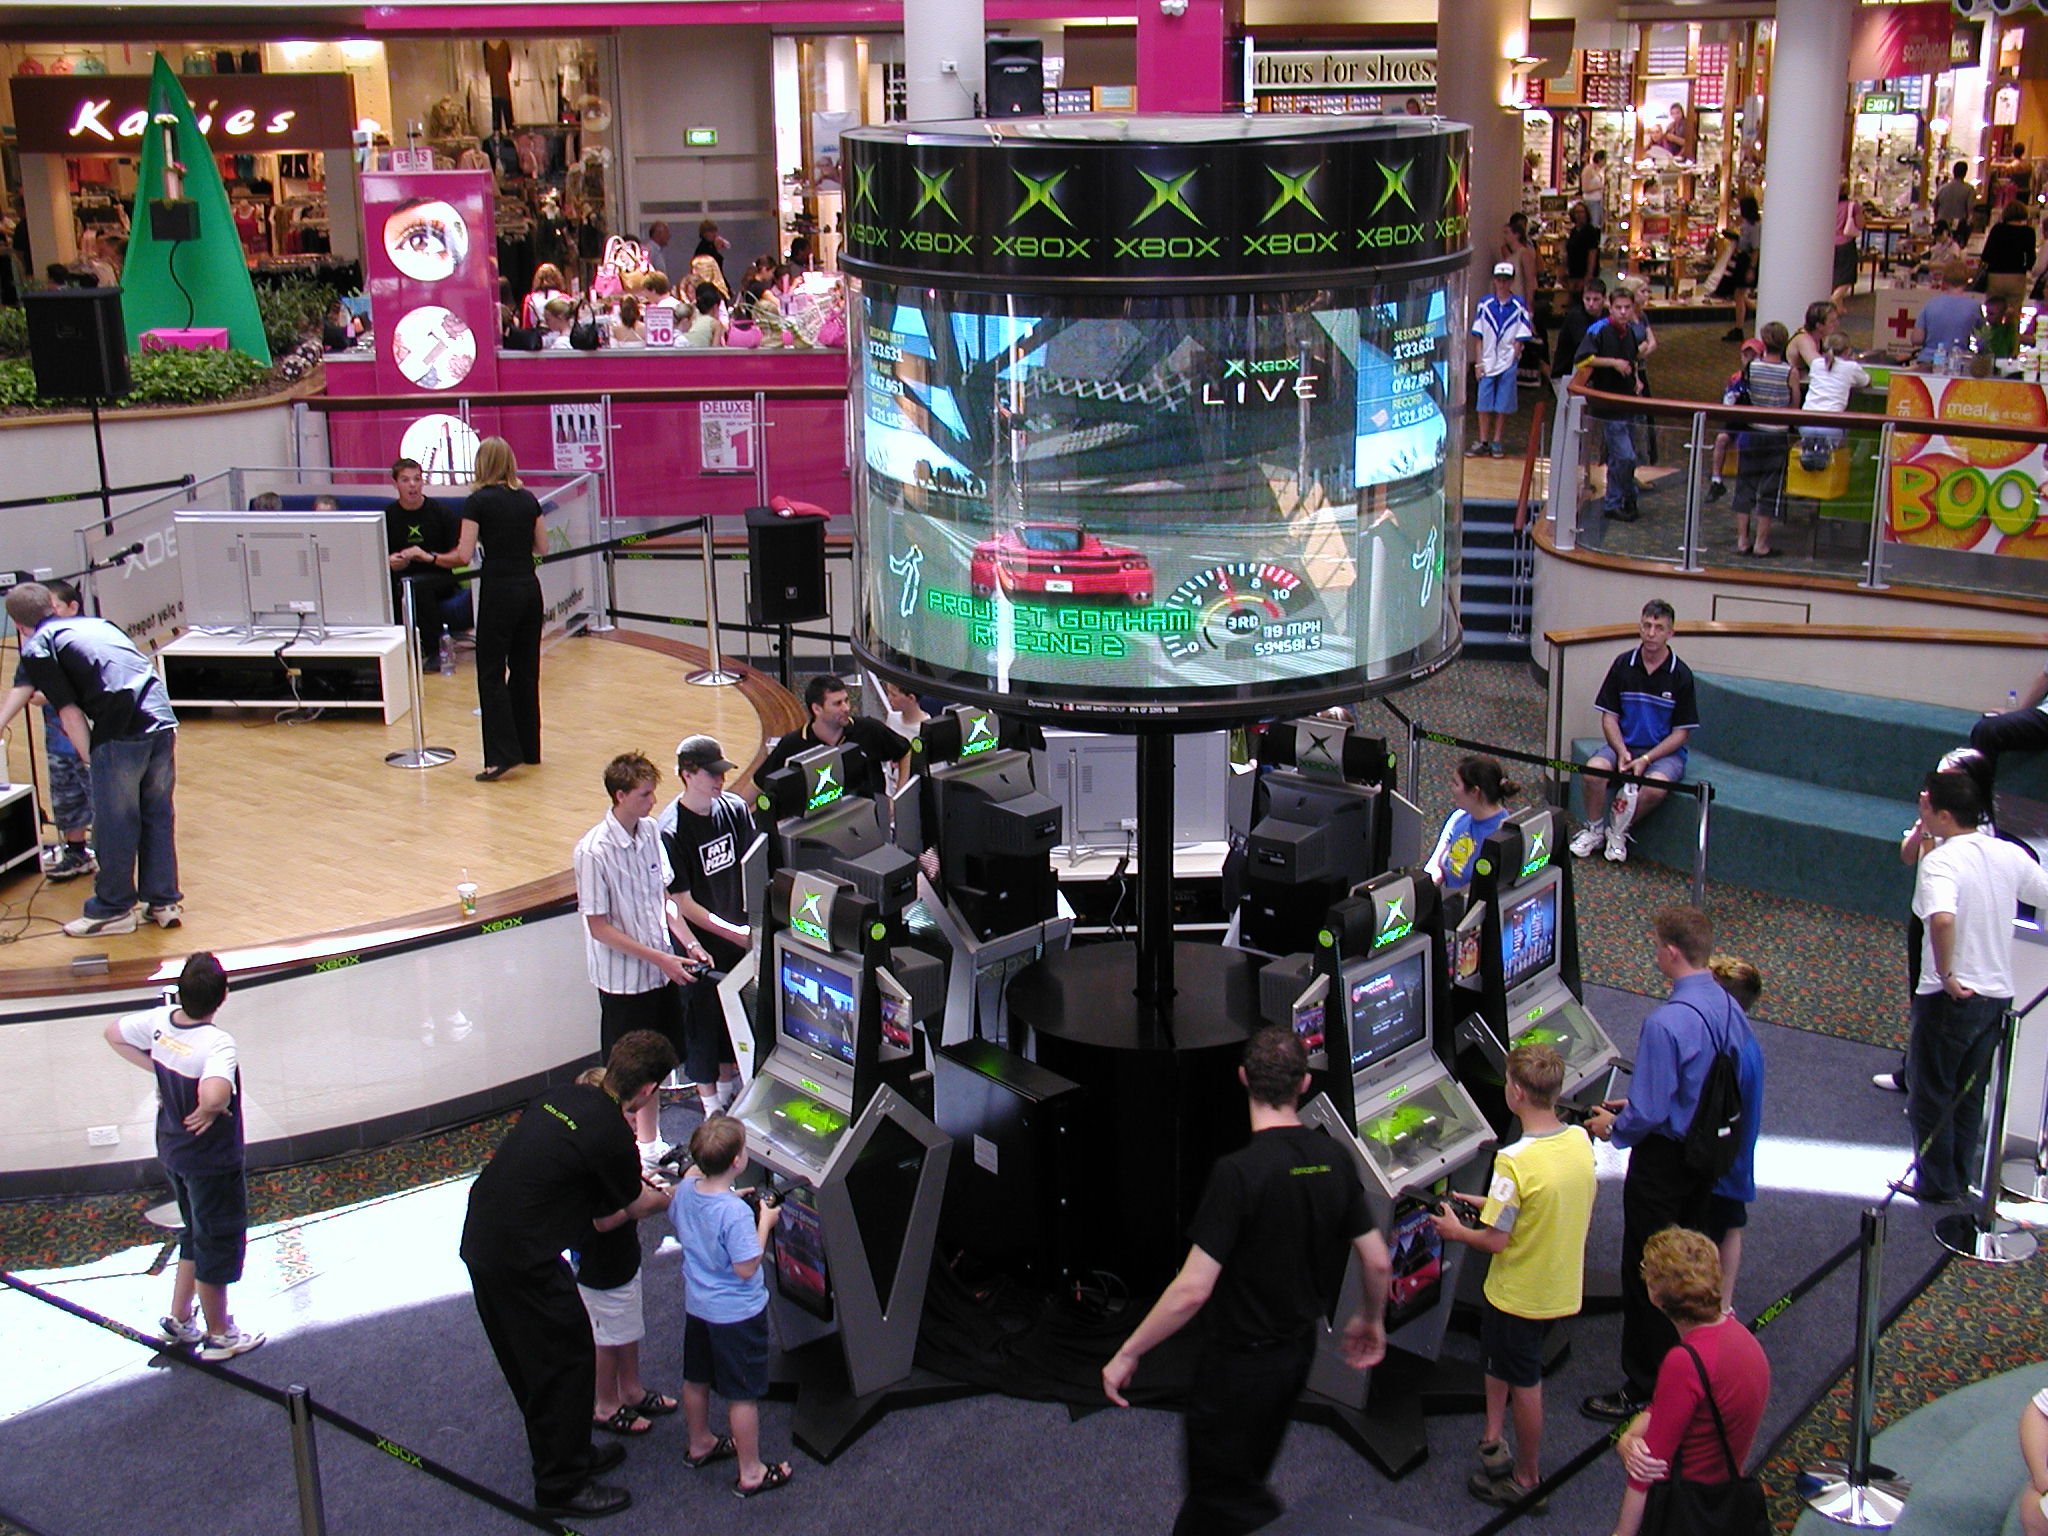 DS2012 | 360 Degree LED Video Display